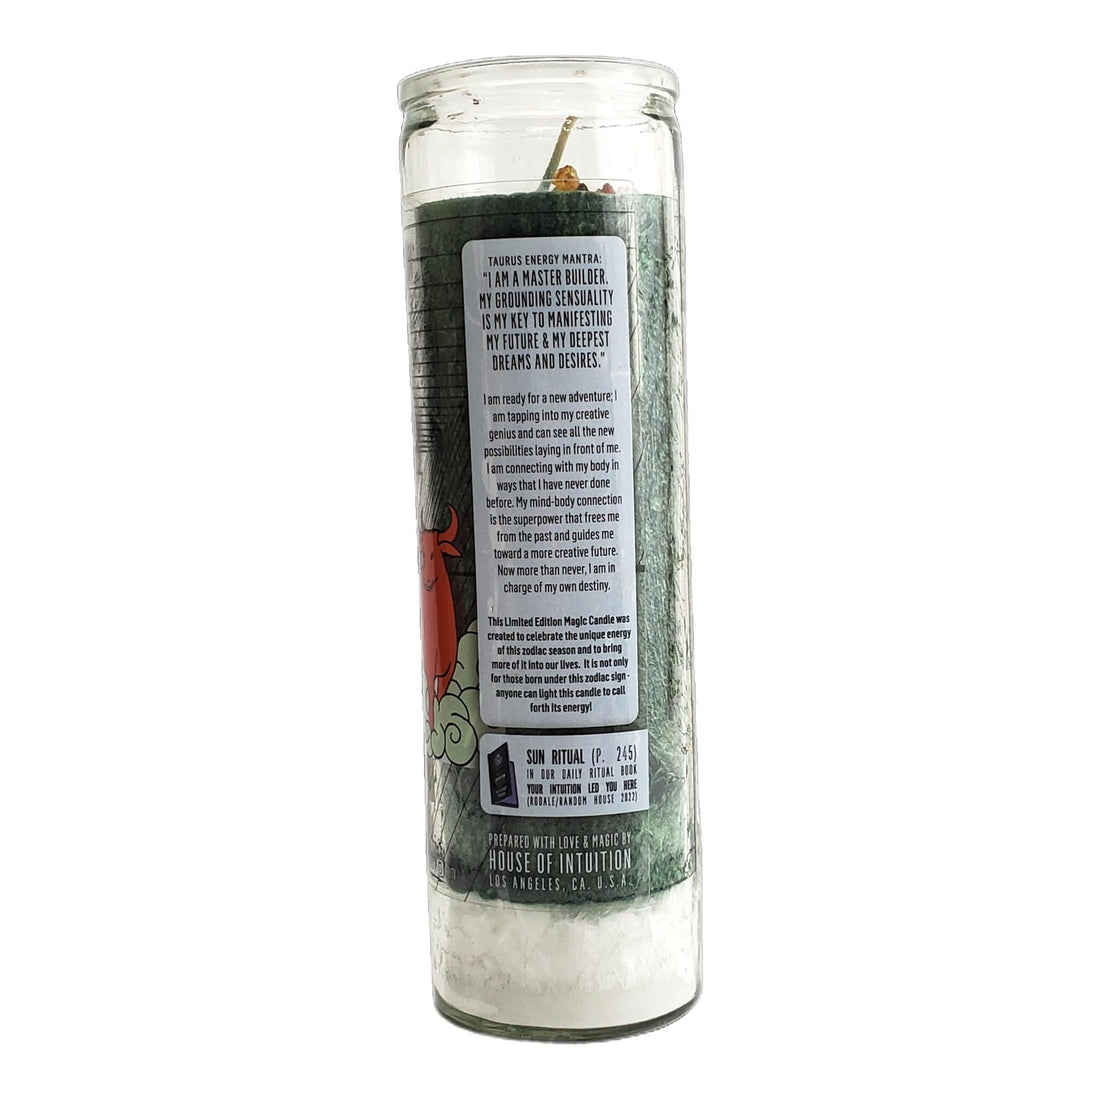 2023 Taurus Solar Return Magic Candle | April 20 - May 20 (Limited Edition) Happy Birthday Candle House of Intuition 